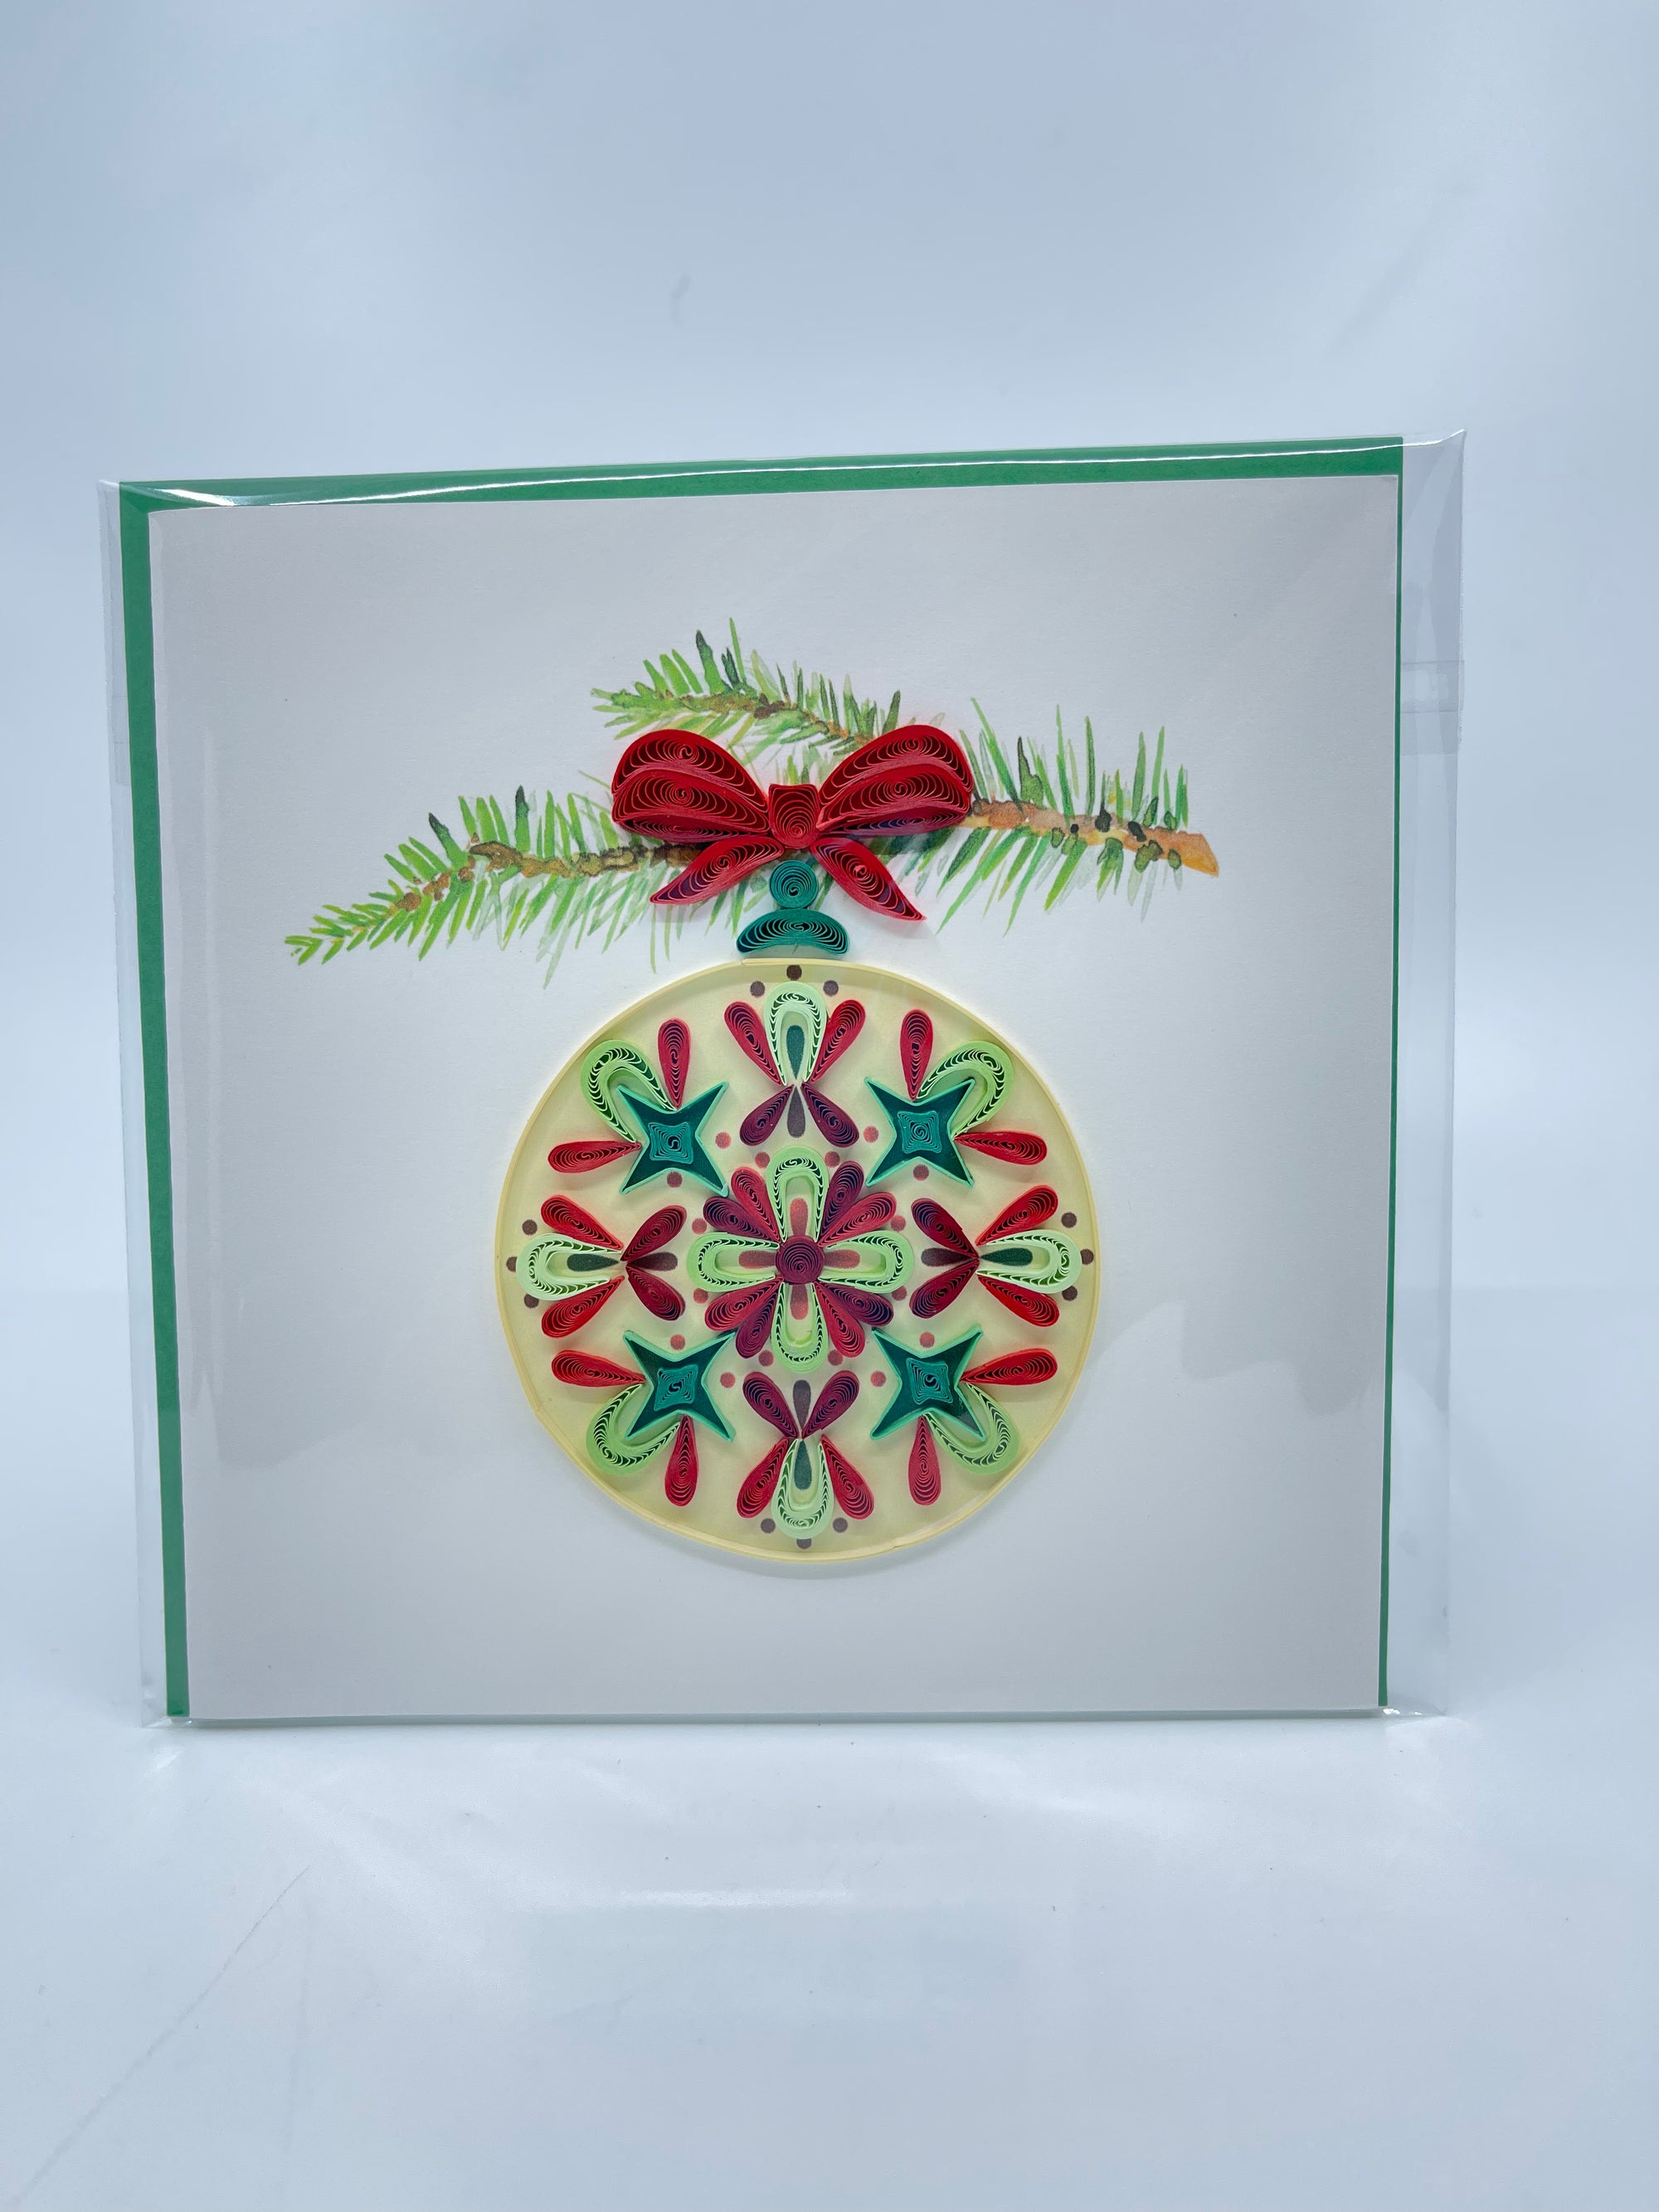 Quillling Card: Traditional Ornament - Quillling Card: Traditional Ornament -  - House of Himwitsa Native Art Gallery and Gifts